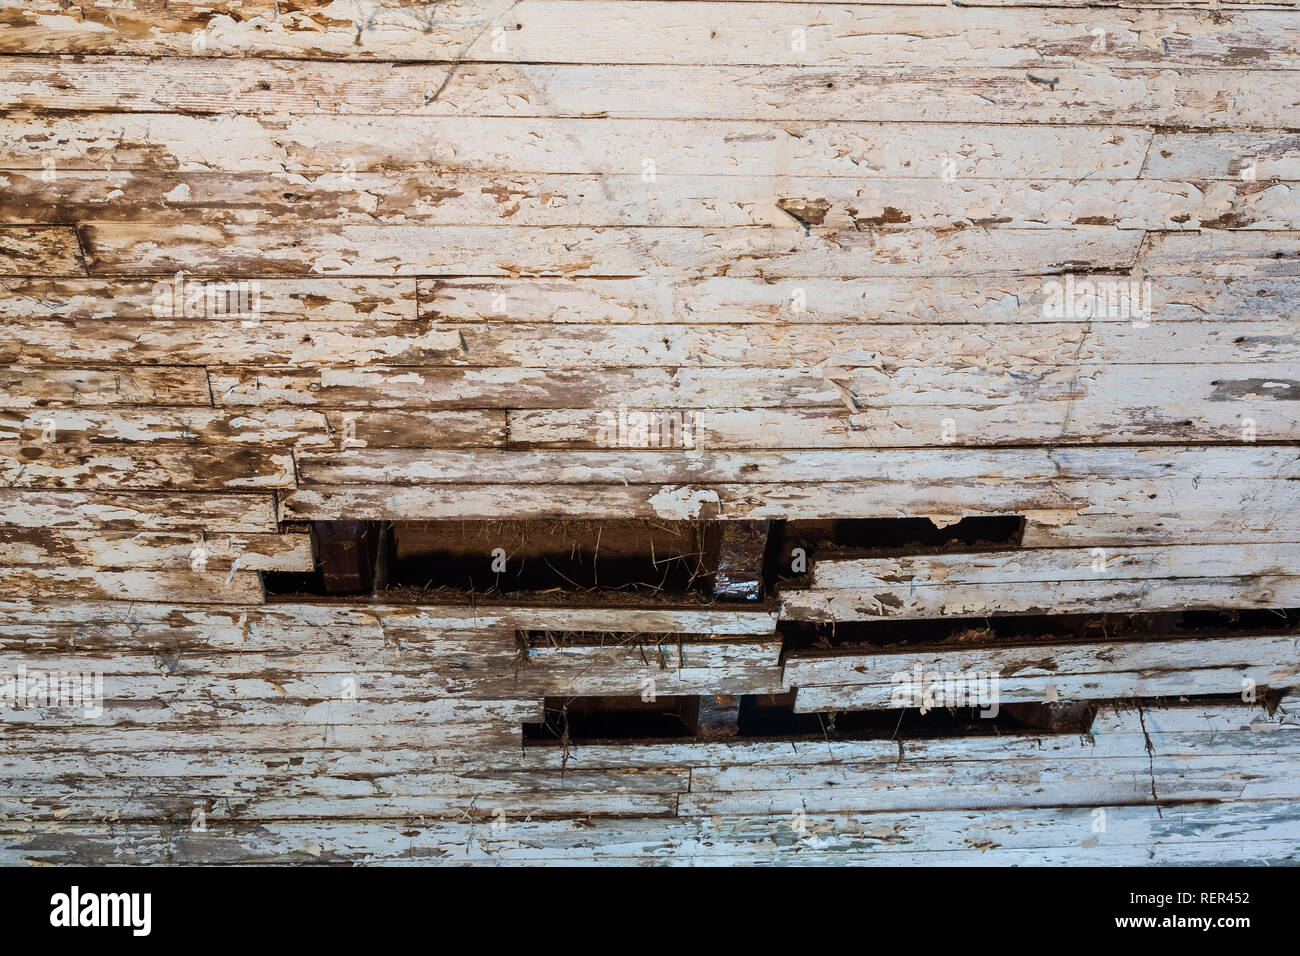 Close Up Of Faded White Painted Wood Planked Ceiling With Water